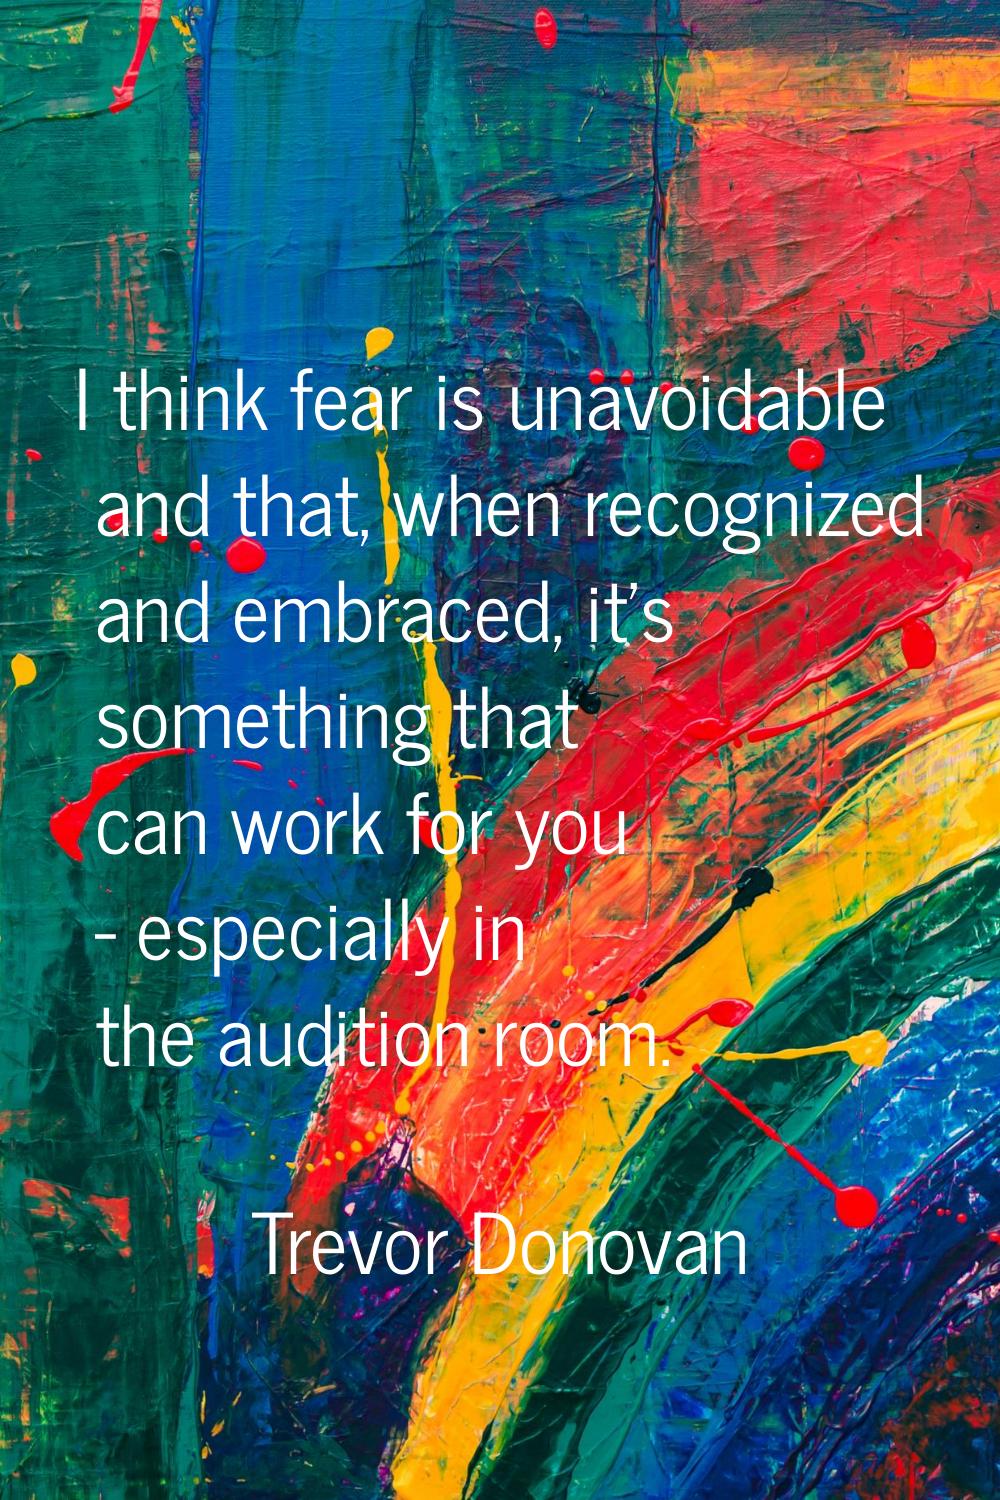 I think fear is unavoidable and that, when recognized and embraced, it's something that can work fo